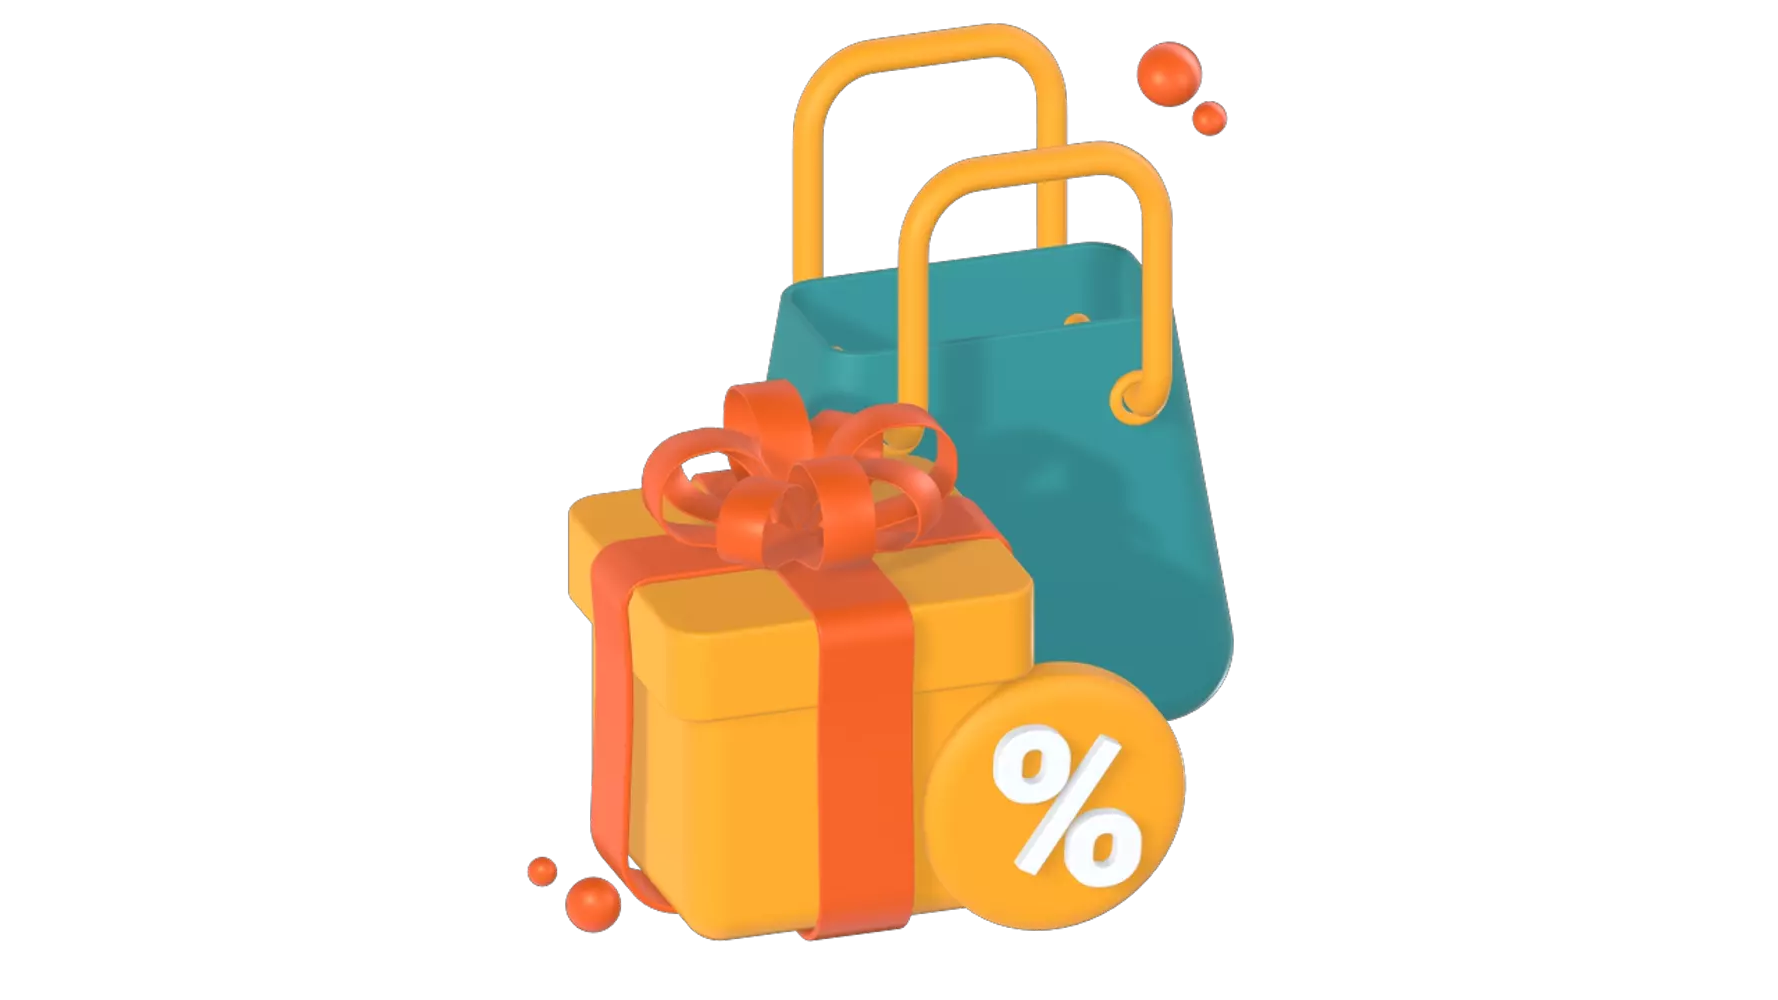 Shopping Bag 3D Graphic